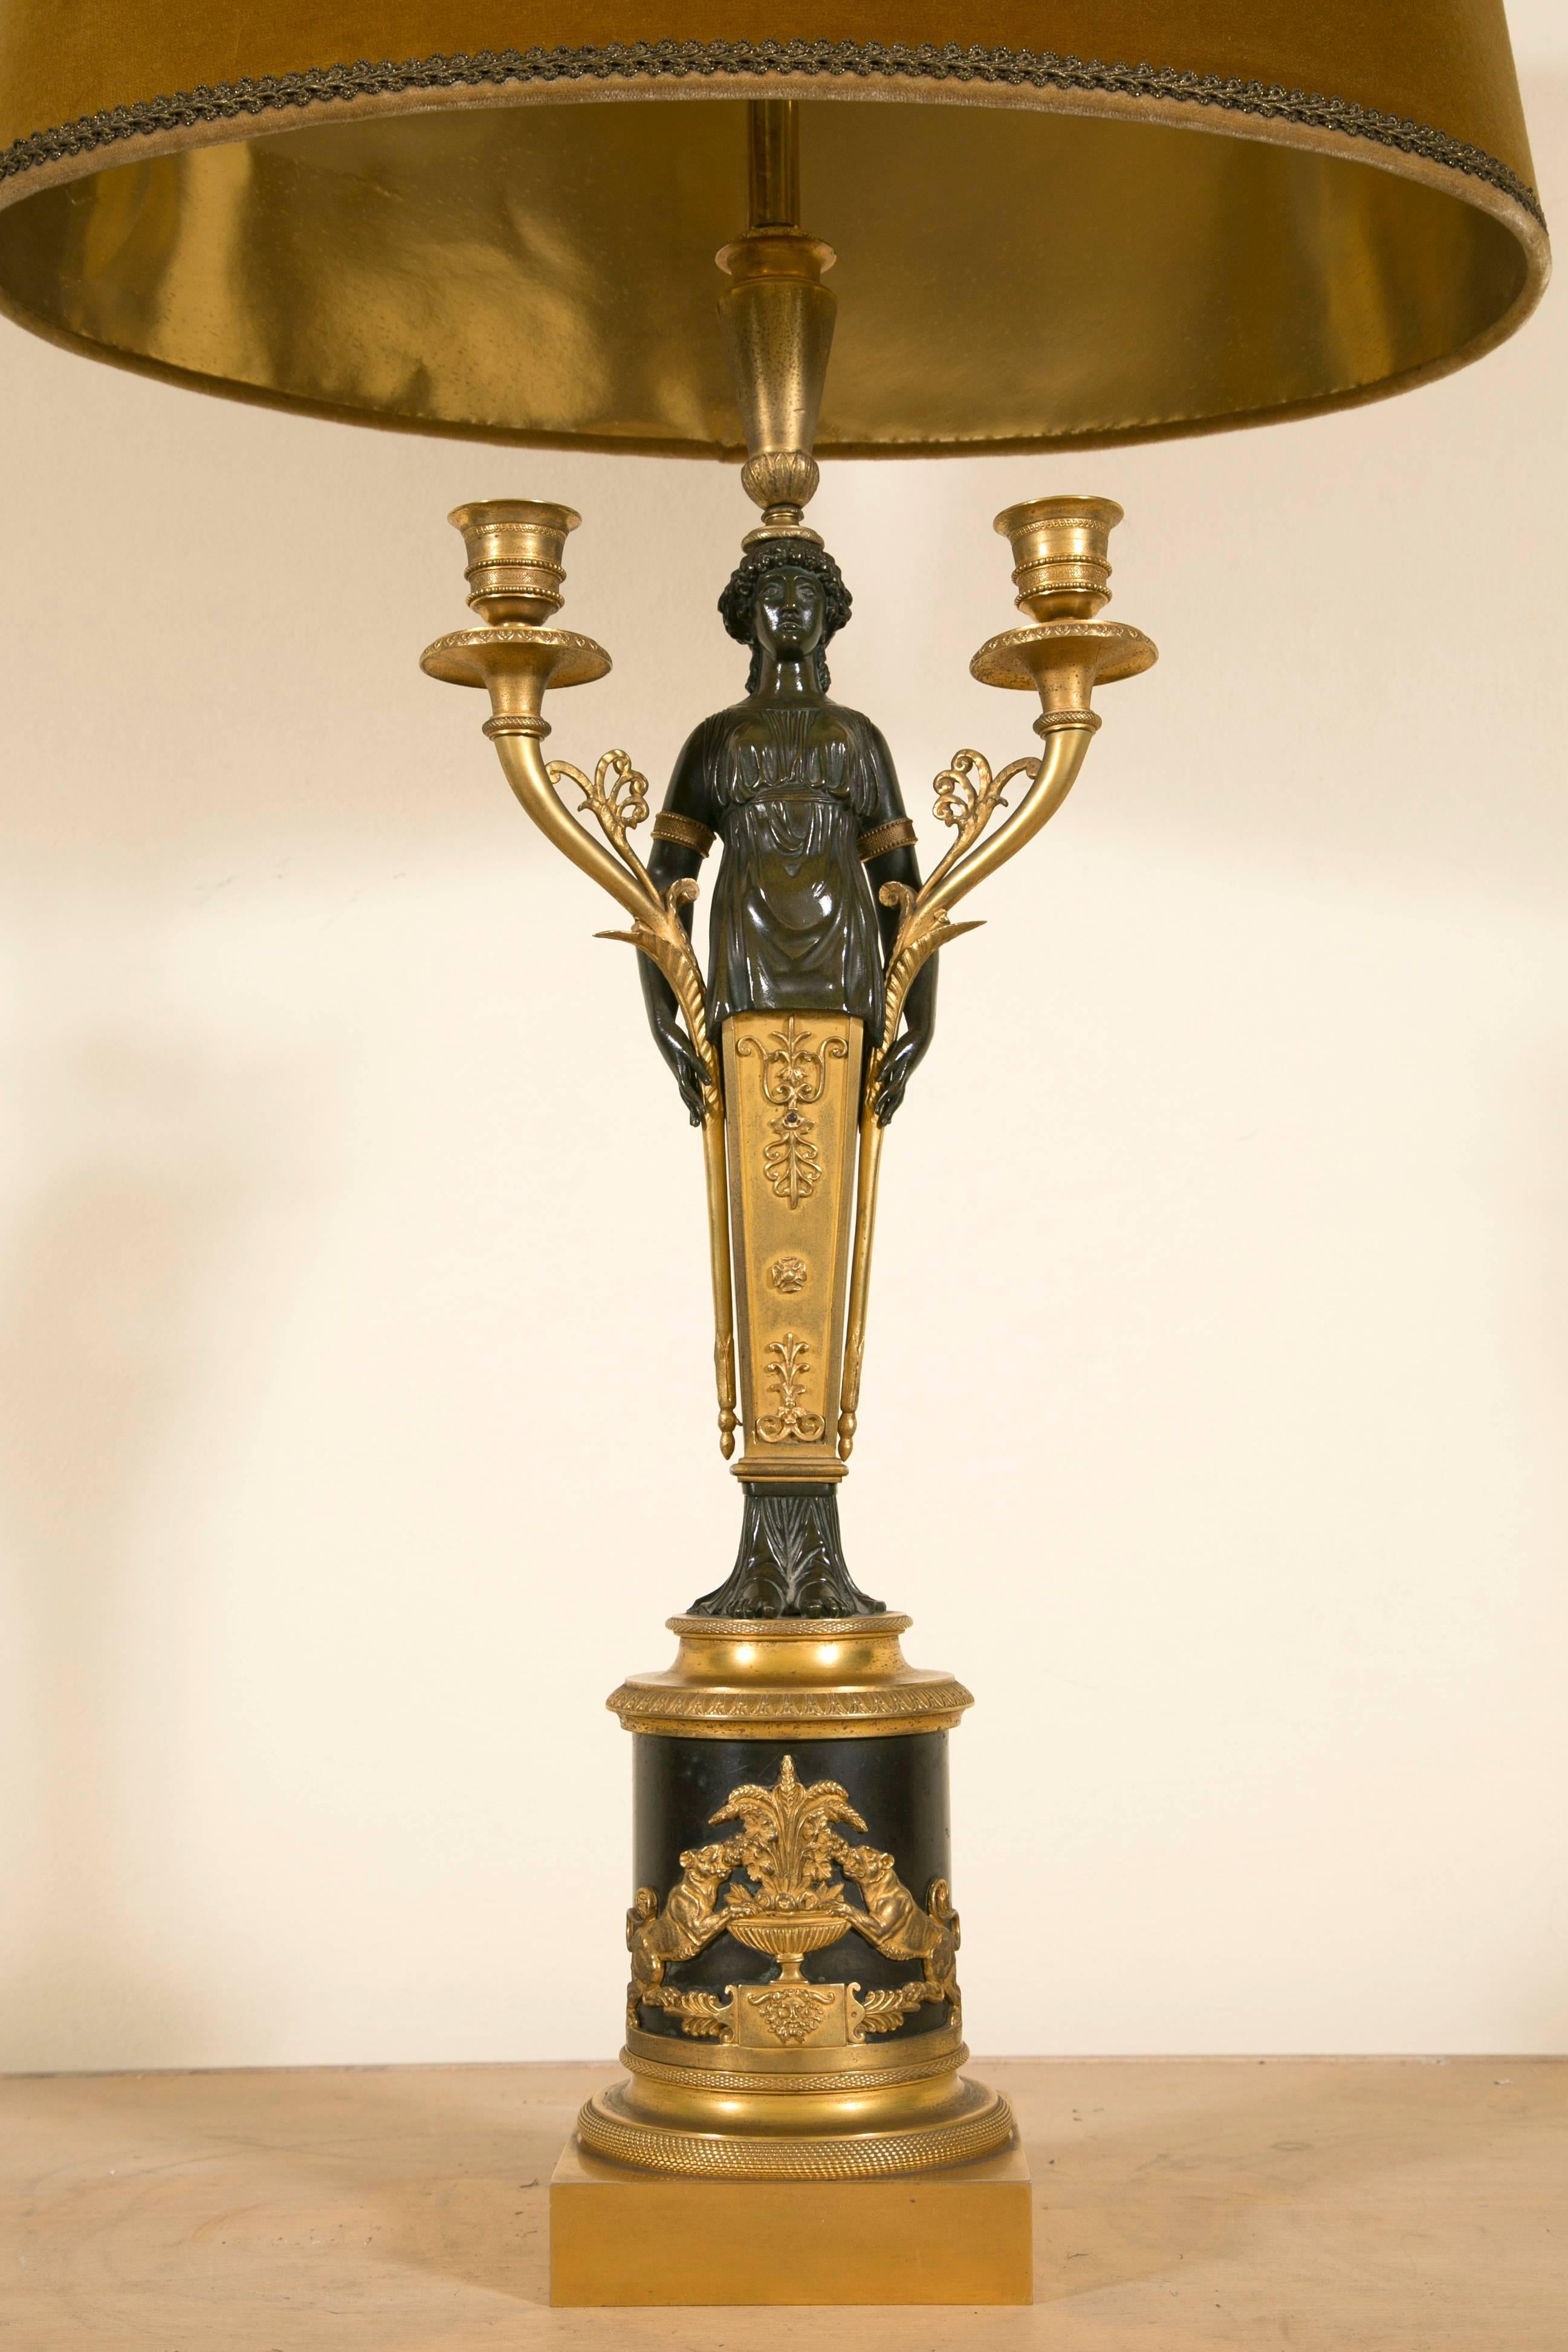 Very rare Empire style lamp base gilt and dark bronze, beautifully executed model with fine attention to details. The woman holding the two branches presents a nice smiling face and wears a delicate draped dress.
On the base the two gilted lions